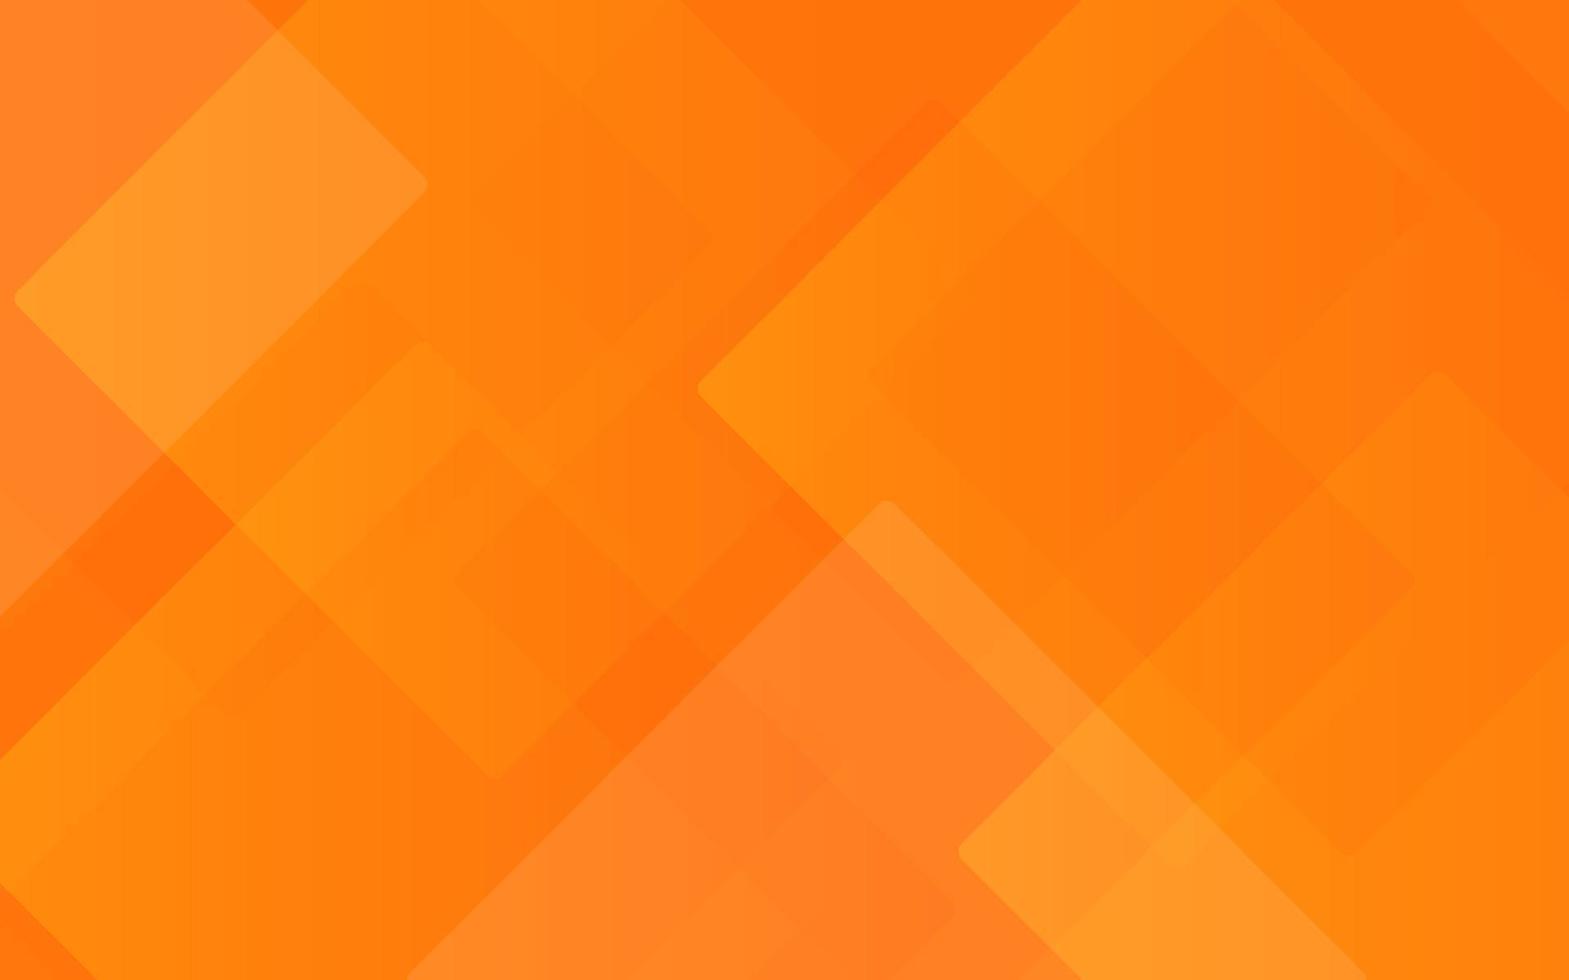 abstract orange geometric shape colorful background vector